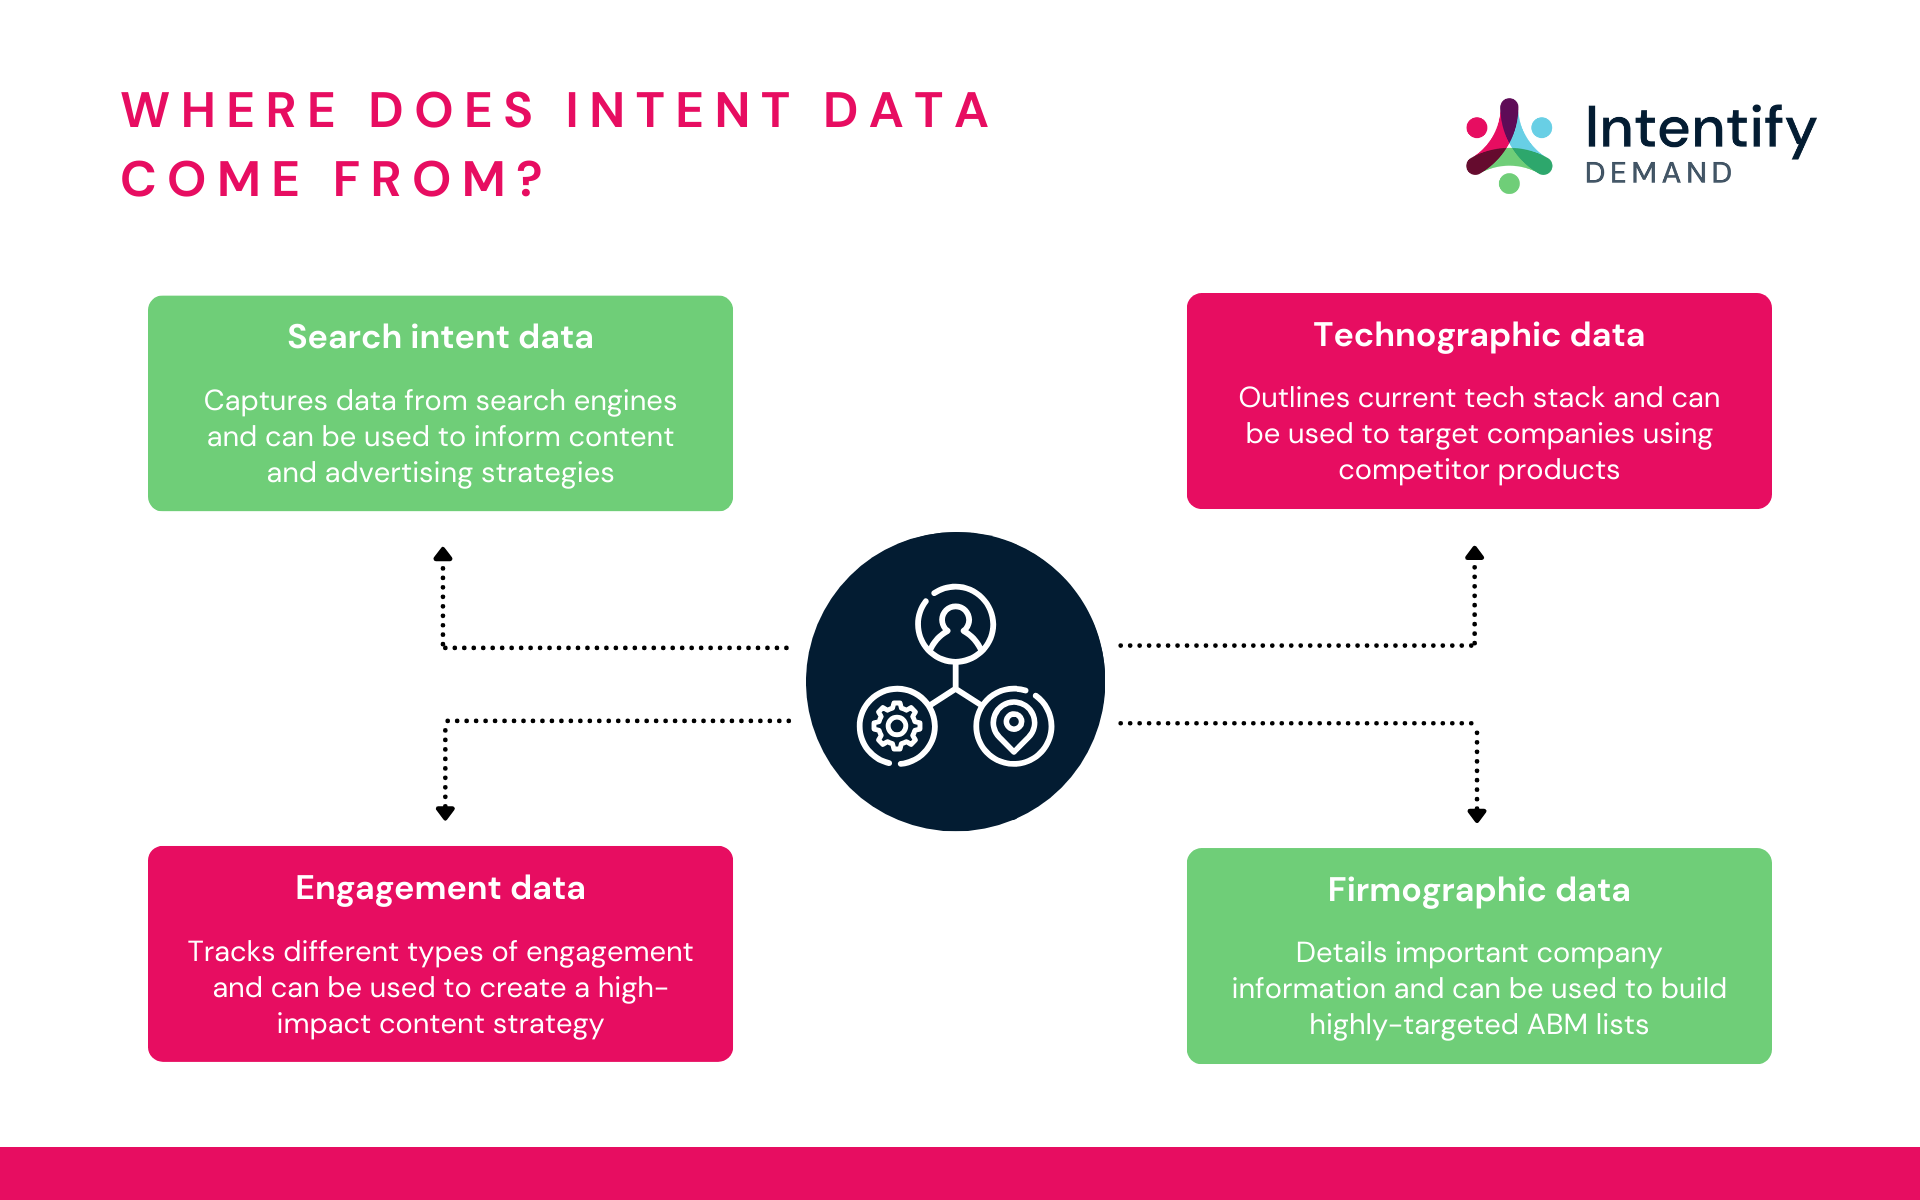 Where does intent data come from